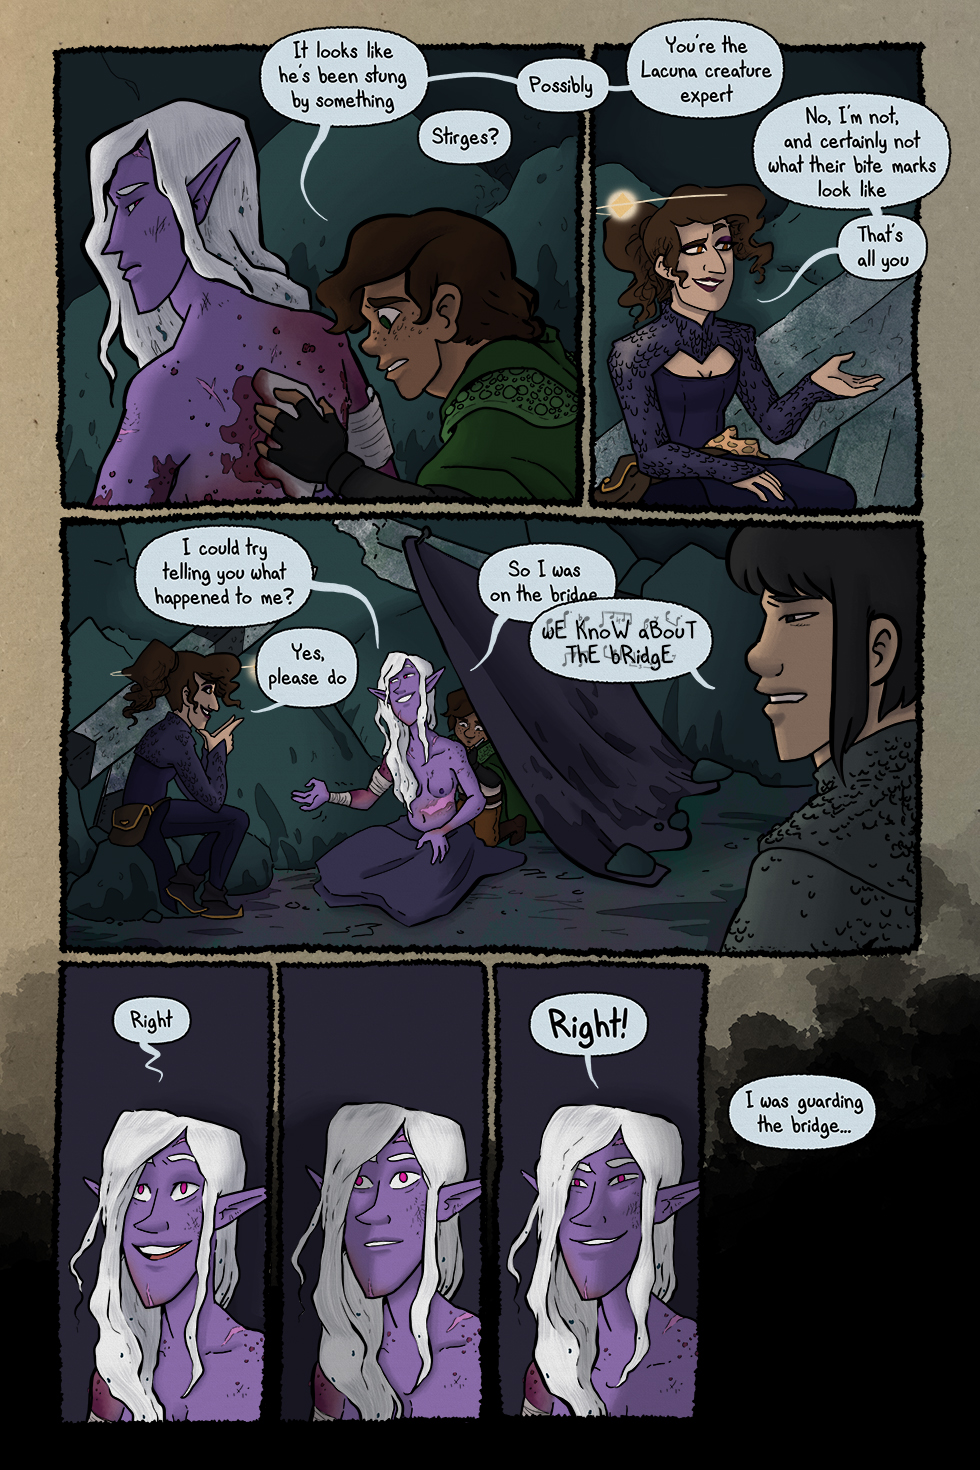 The undeniable writing instinct to skip way ahead and reveal that everything that's gonna happen in the comic is actually a story being told to a purple elf you just met